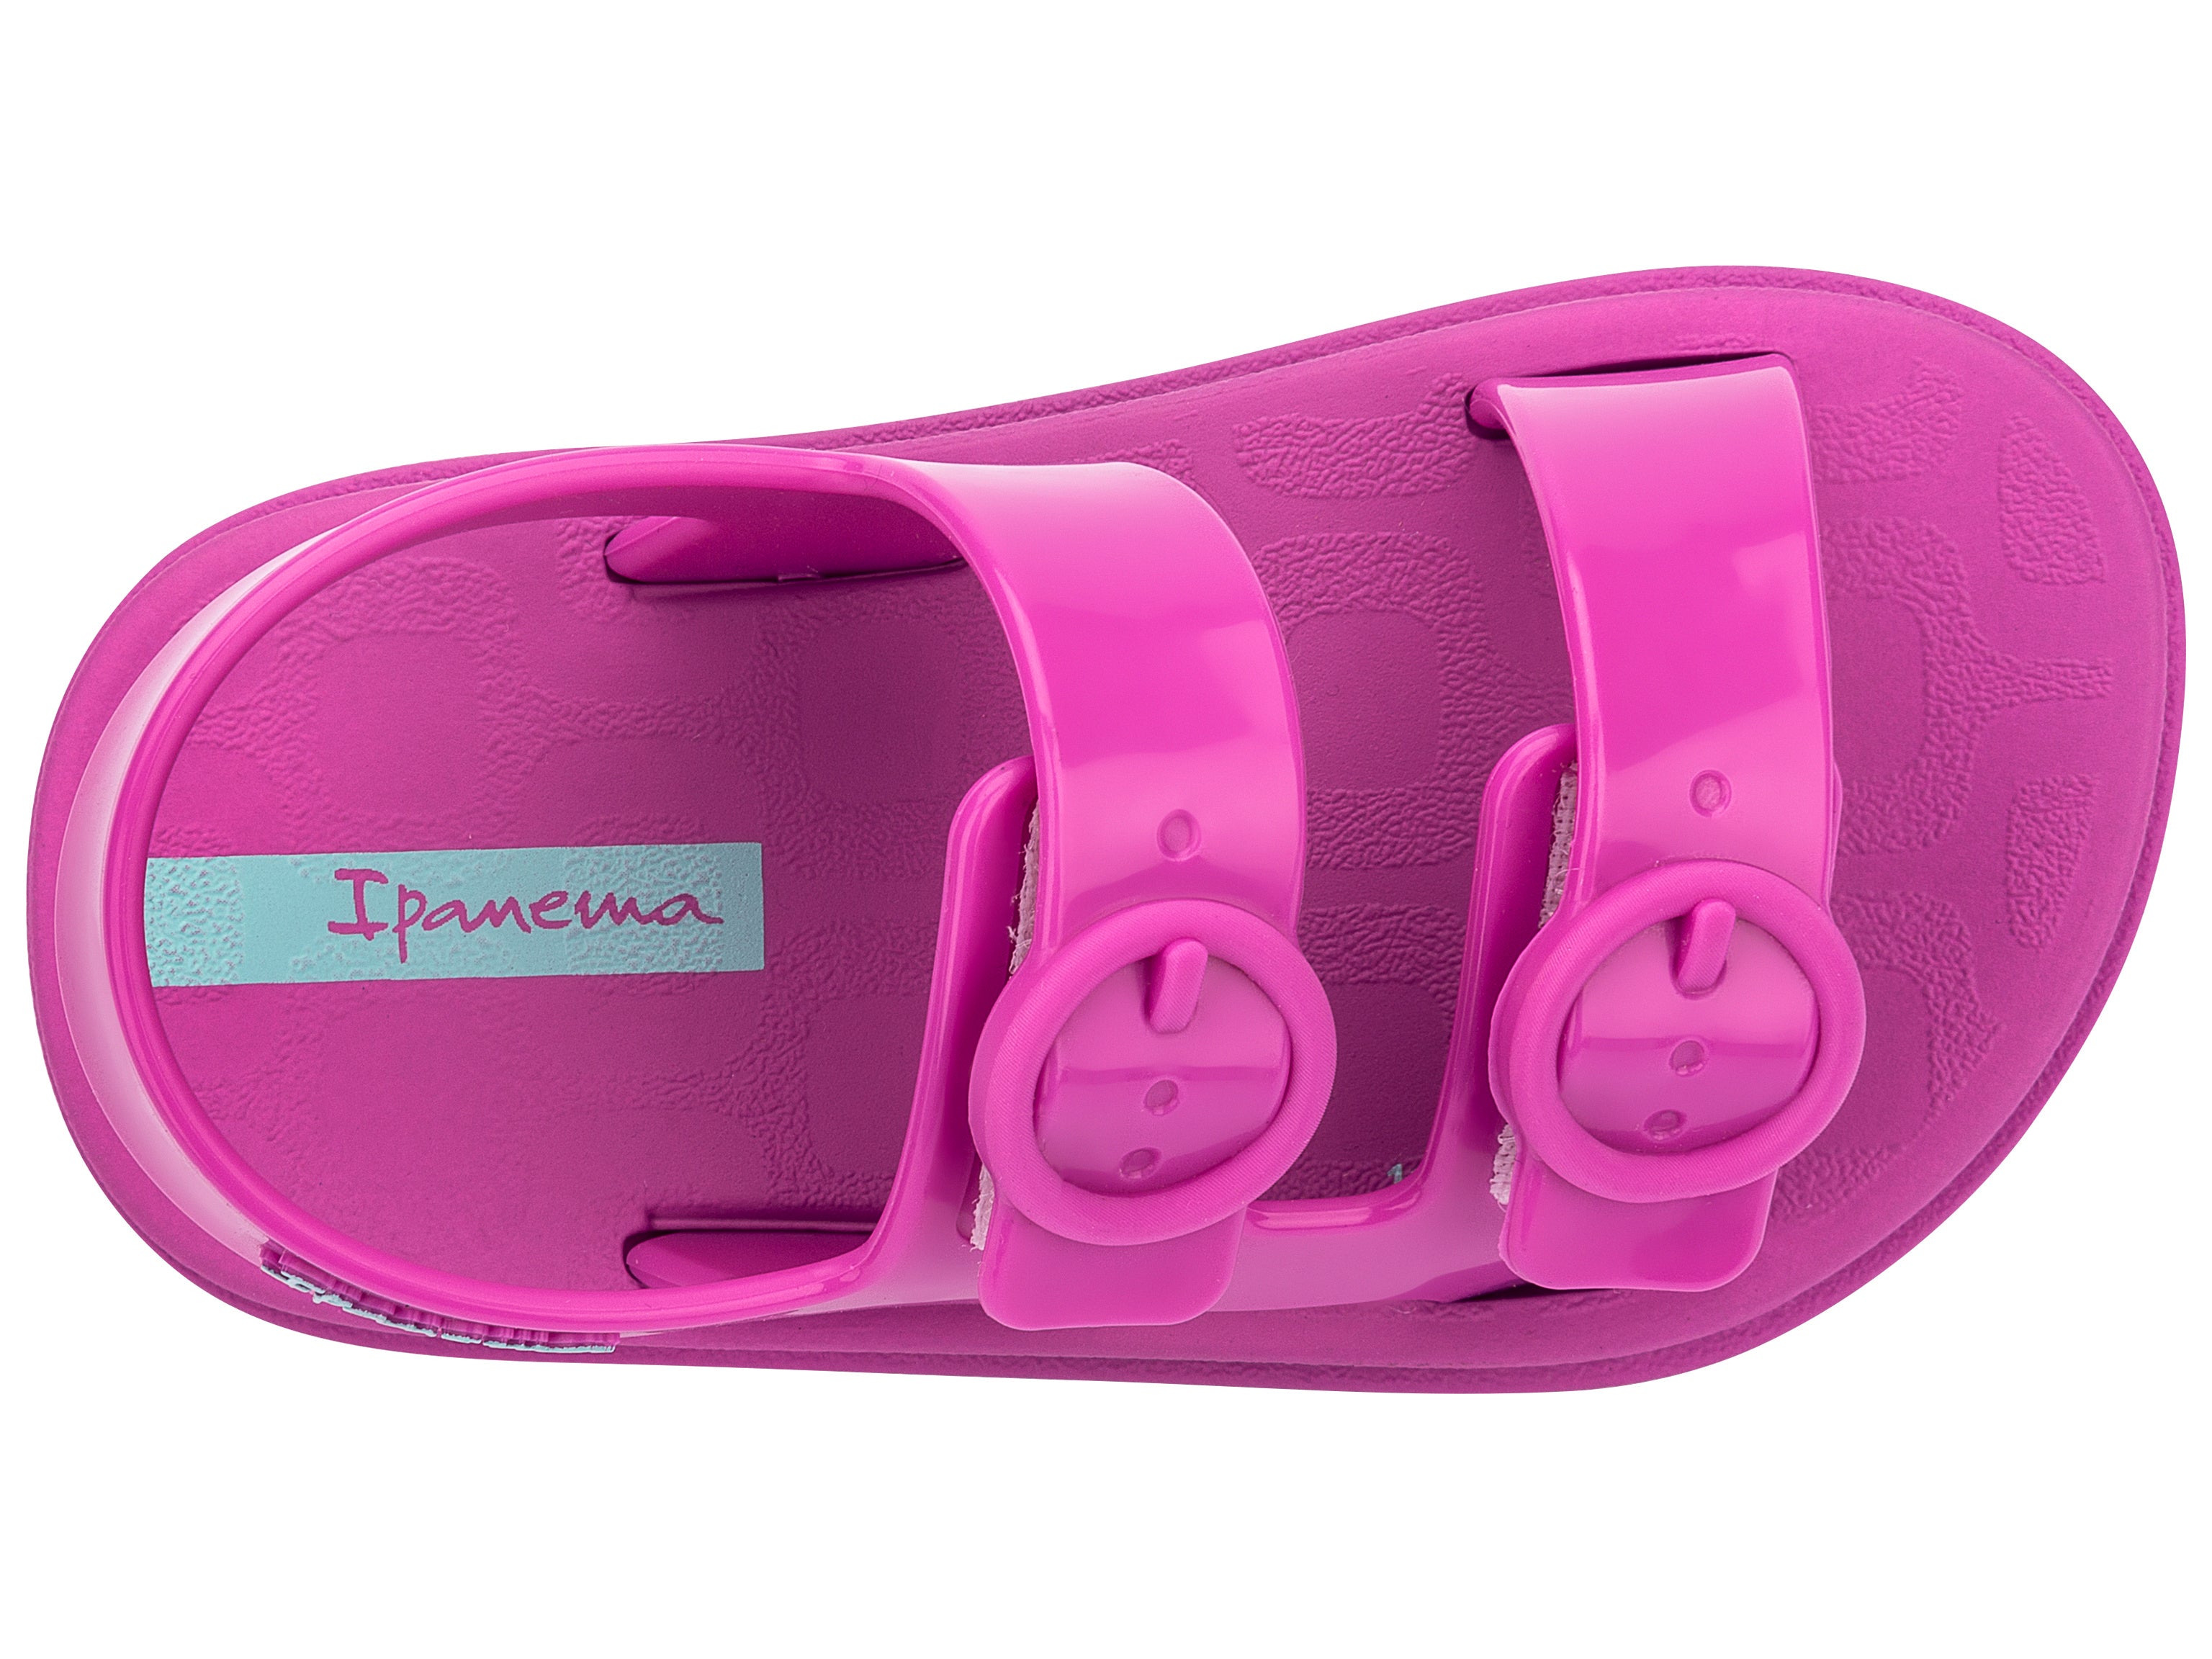 Top view of a pink Ipanema Follow baby sandal with two decorative buckles on the upper.